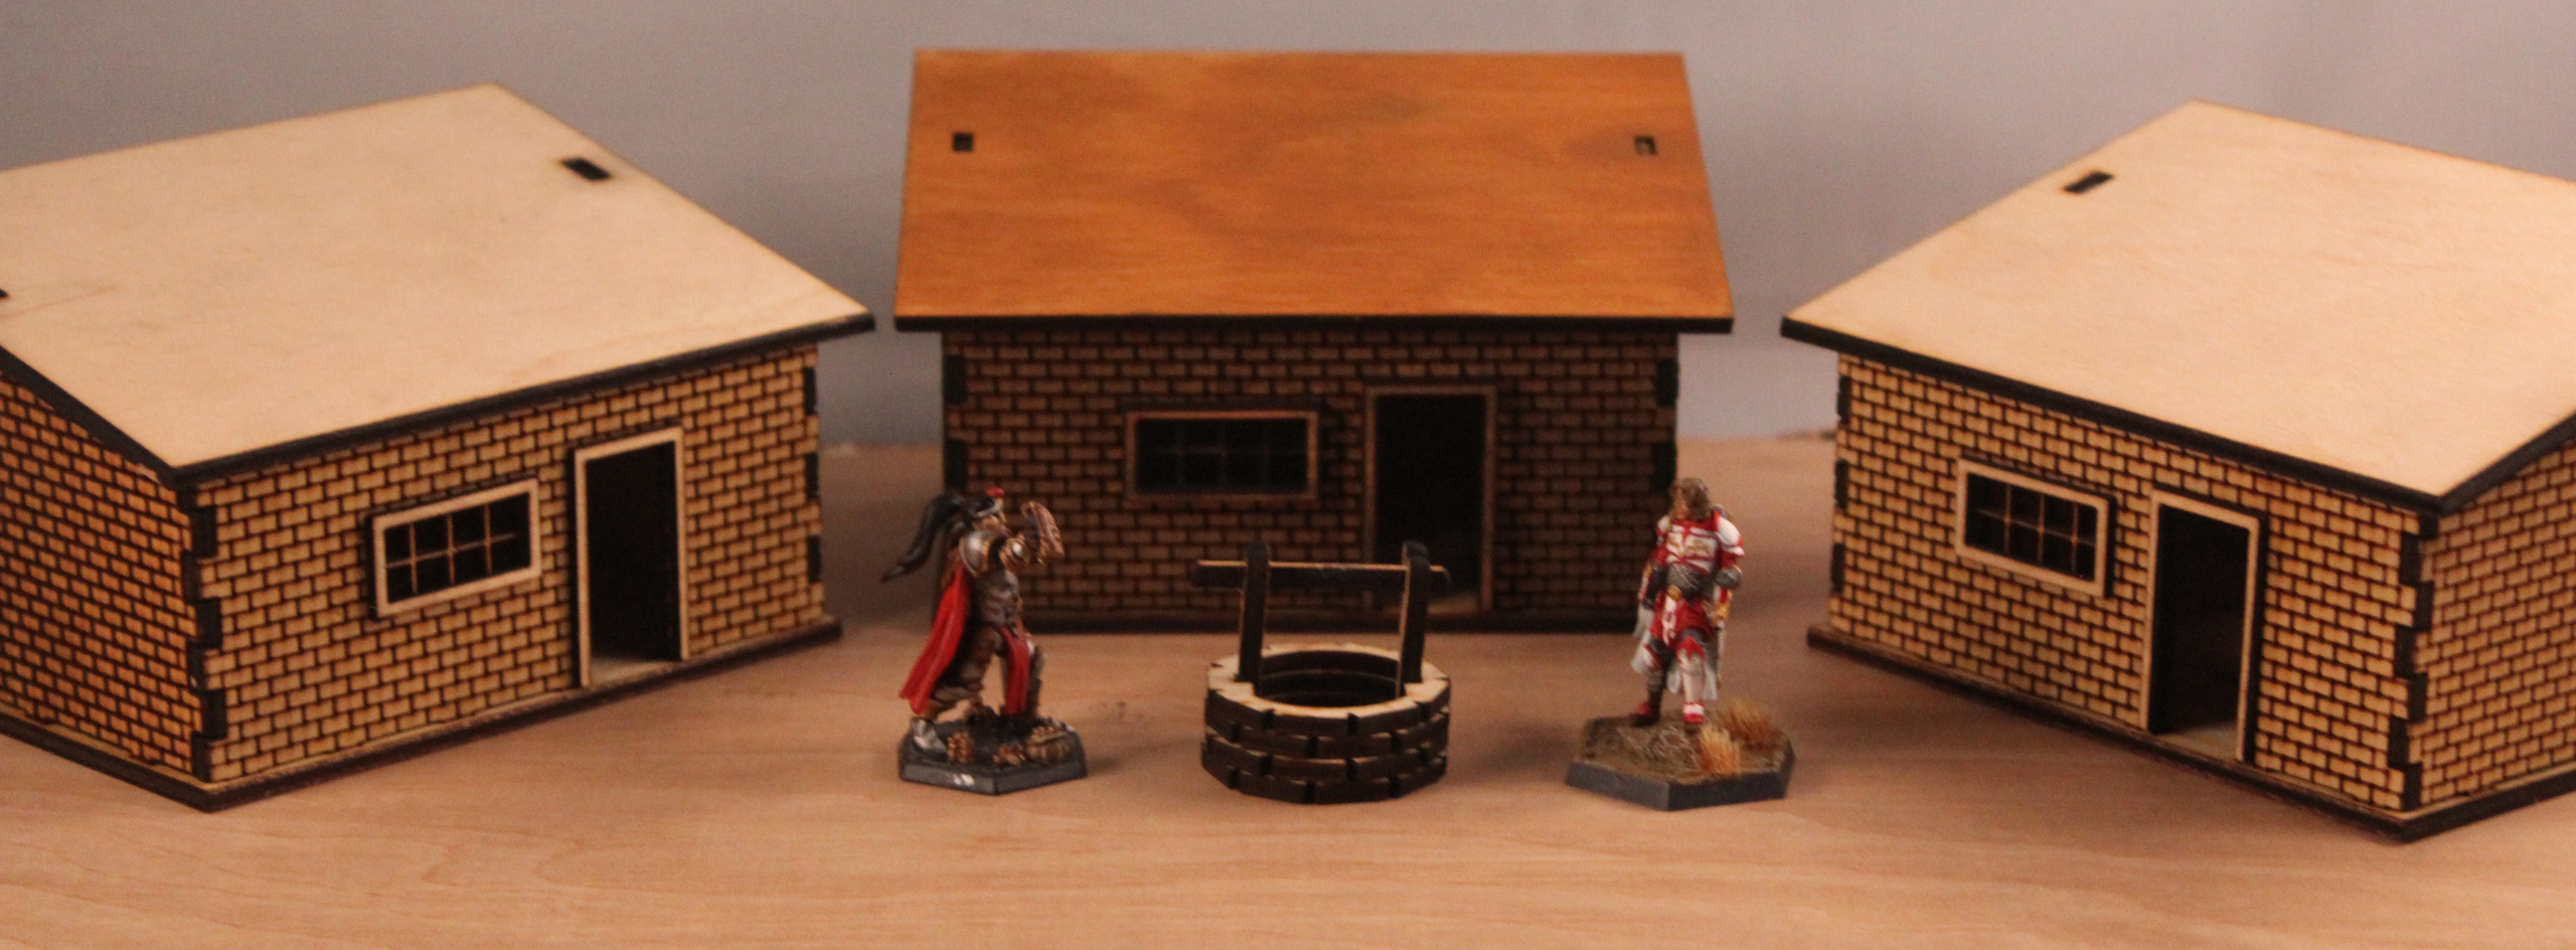 Two small miniature figurines standing near a well with three legacy slant houses behind them.